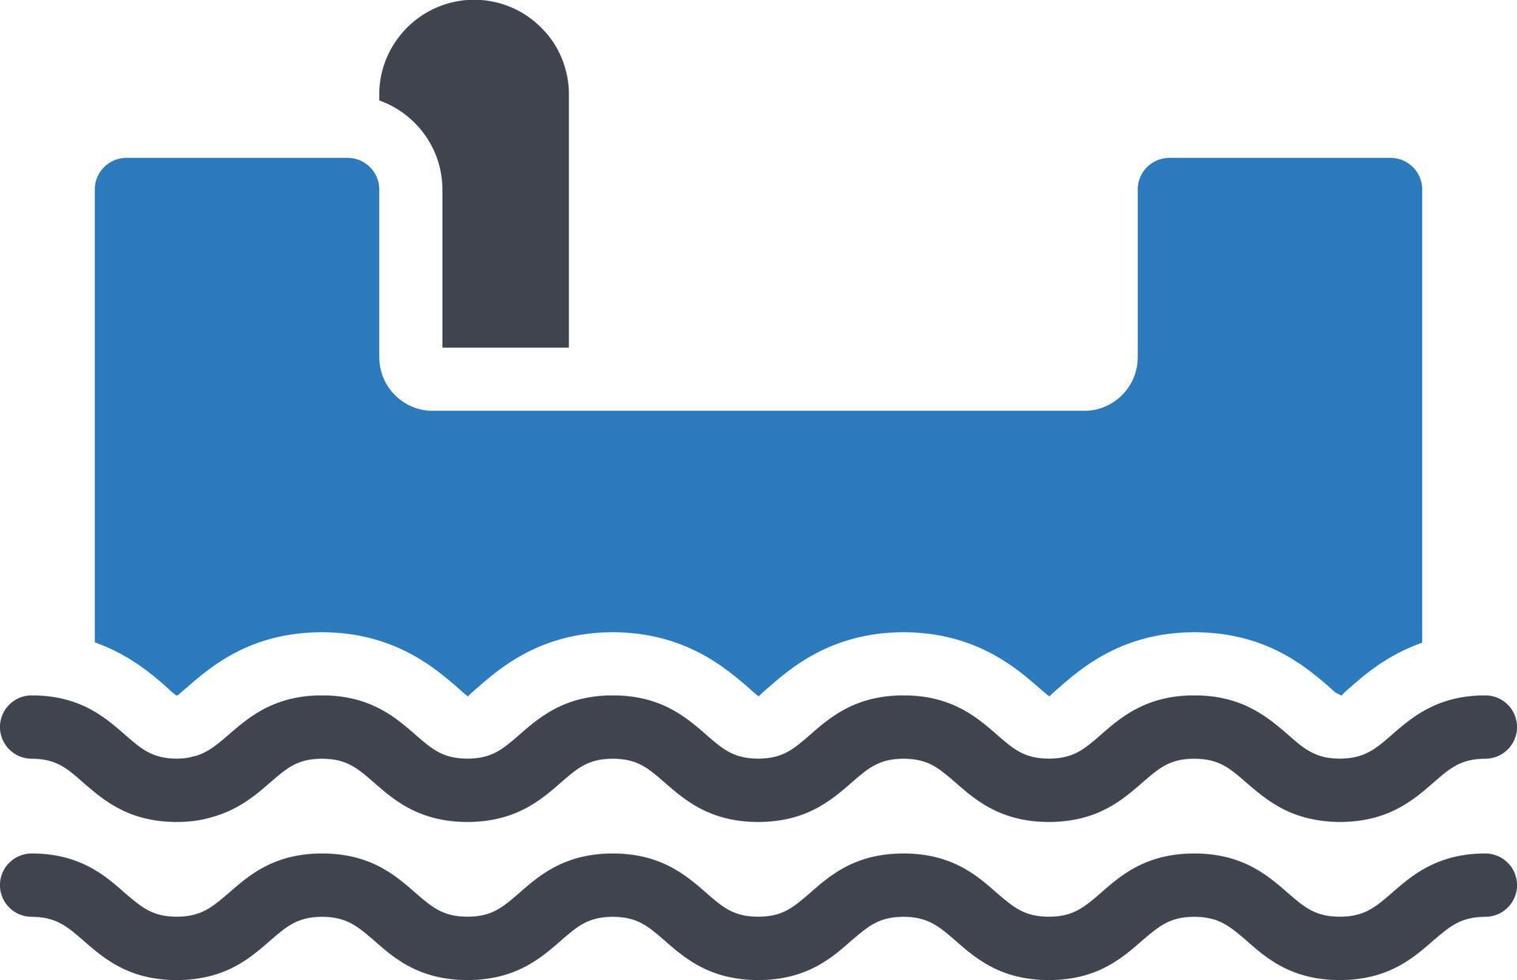 water boat vector illustration on a background.Premium quality symbols.vector icons for concept and graphic design.